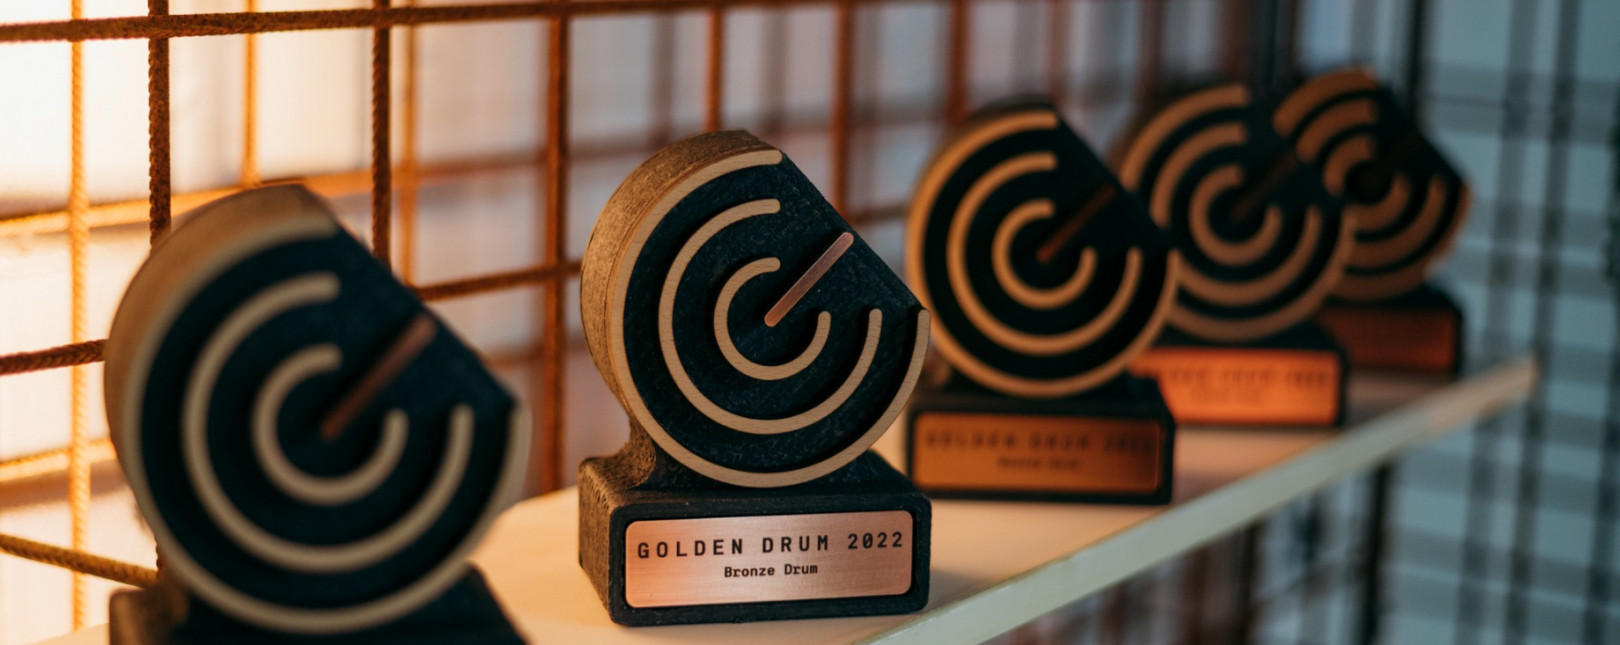 Kreatív Online - White Rabbit becomes the Independent Agency of the Year in the Golden Drum